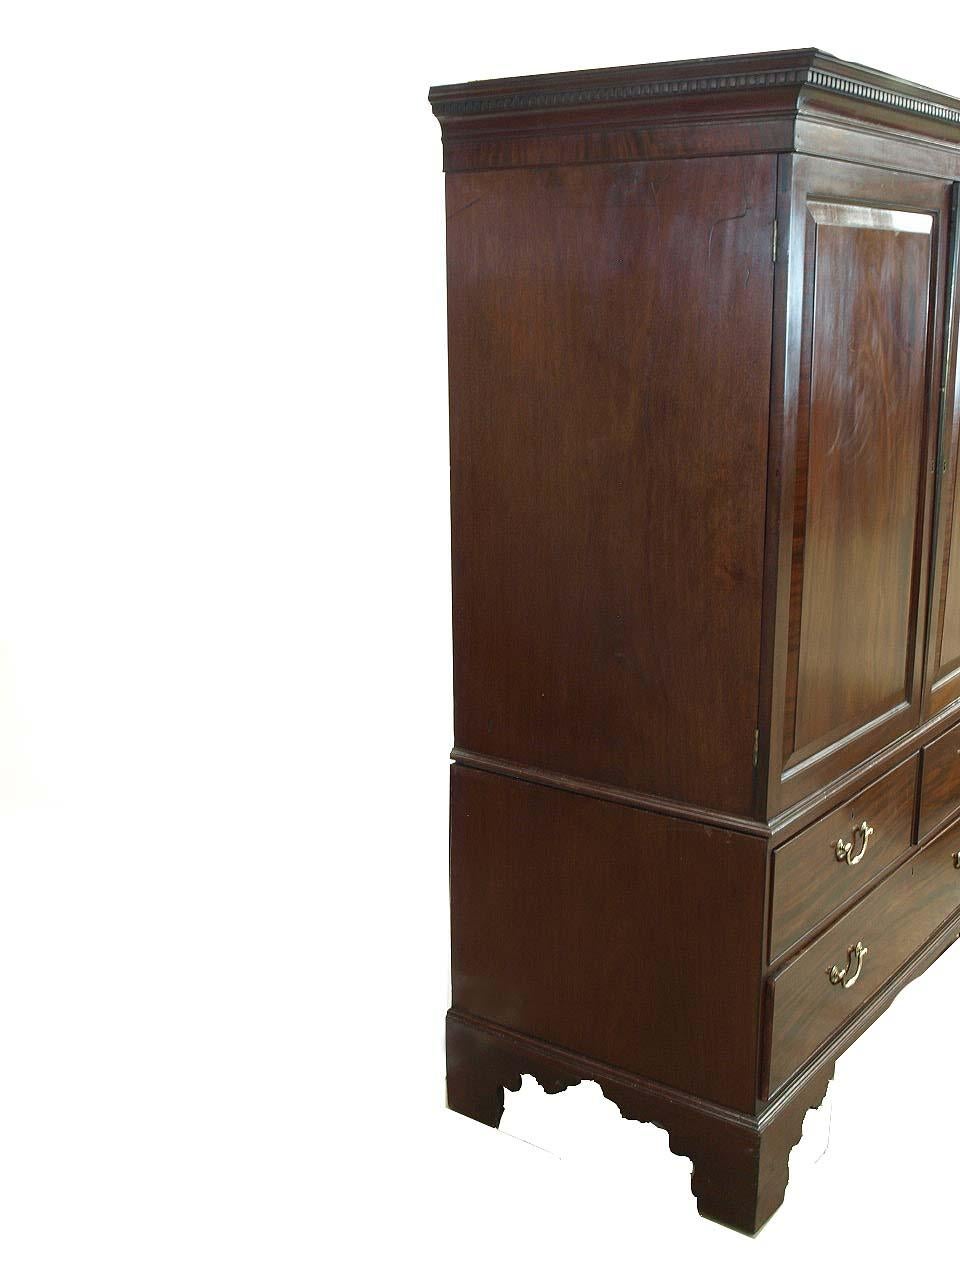 English mahogany Chippendale linen press, with removable cove cornice featuring dentil molding and vertical mahogany veneer, the doors with beautiful matching mahogany veneer raised panels that are cross banded in mahogany. The interior has six